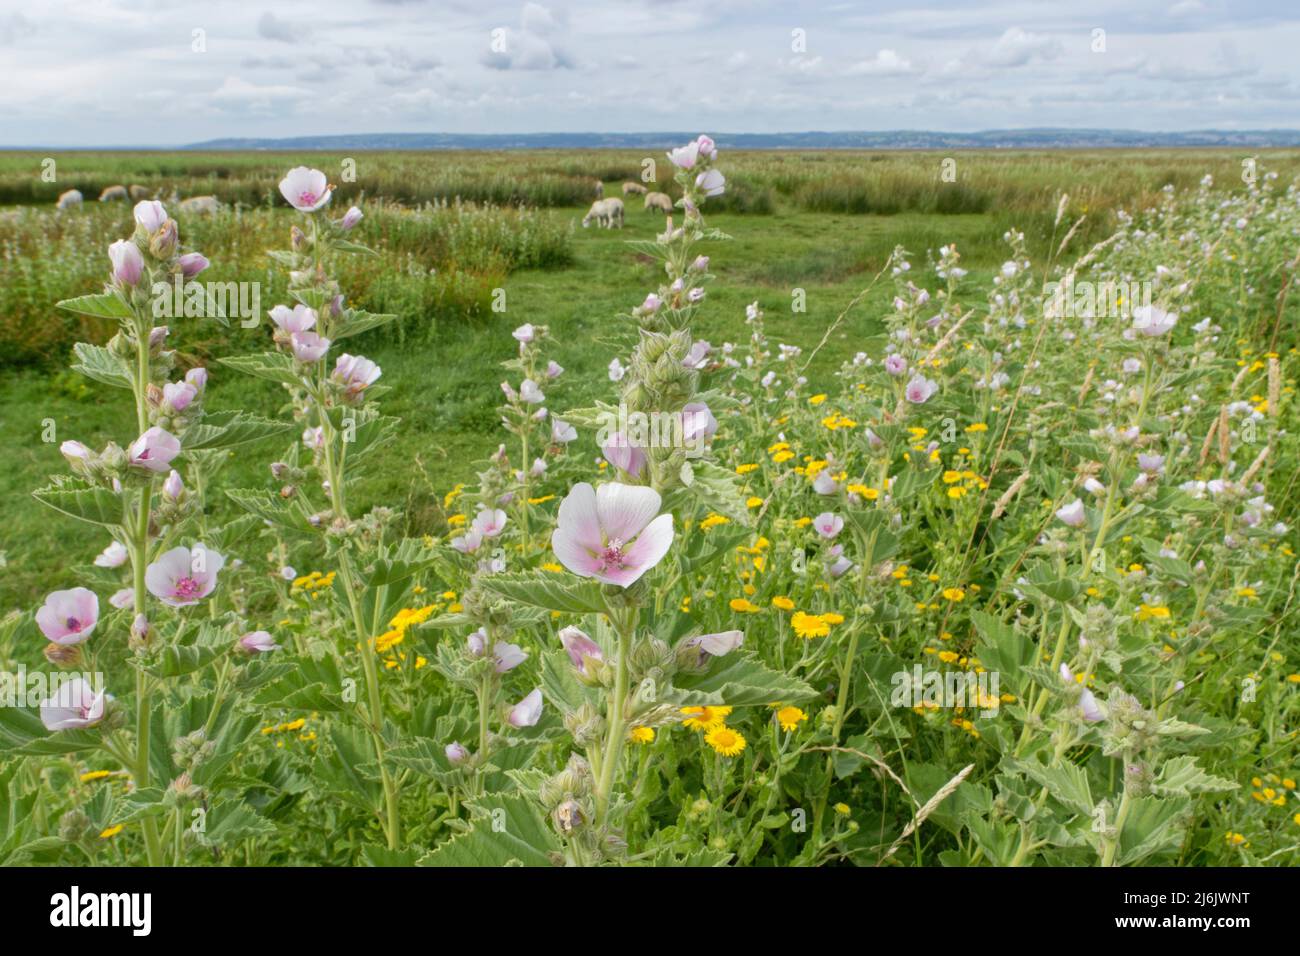 Marsh mallow (Althaea officinalis) clump flowering at the margins of a saltmarsh with Sheep grazing in the background, Llanrhidian, The Gower, Wales. Stock Photo